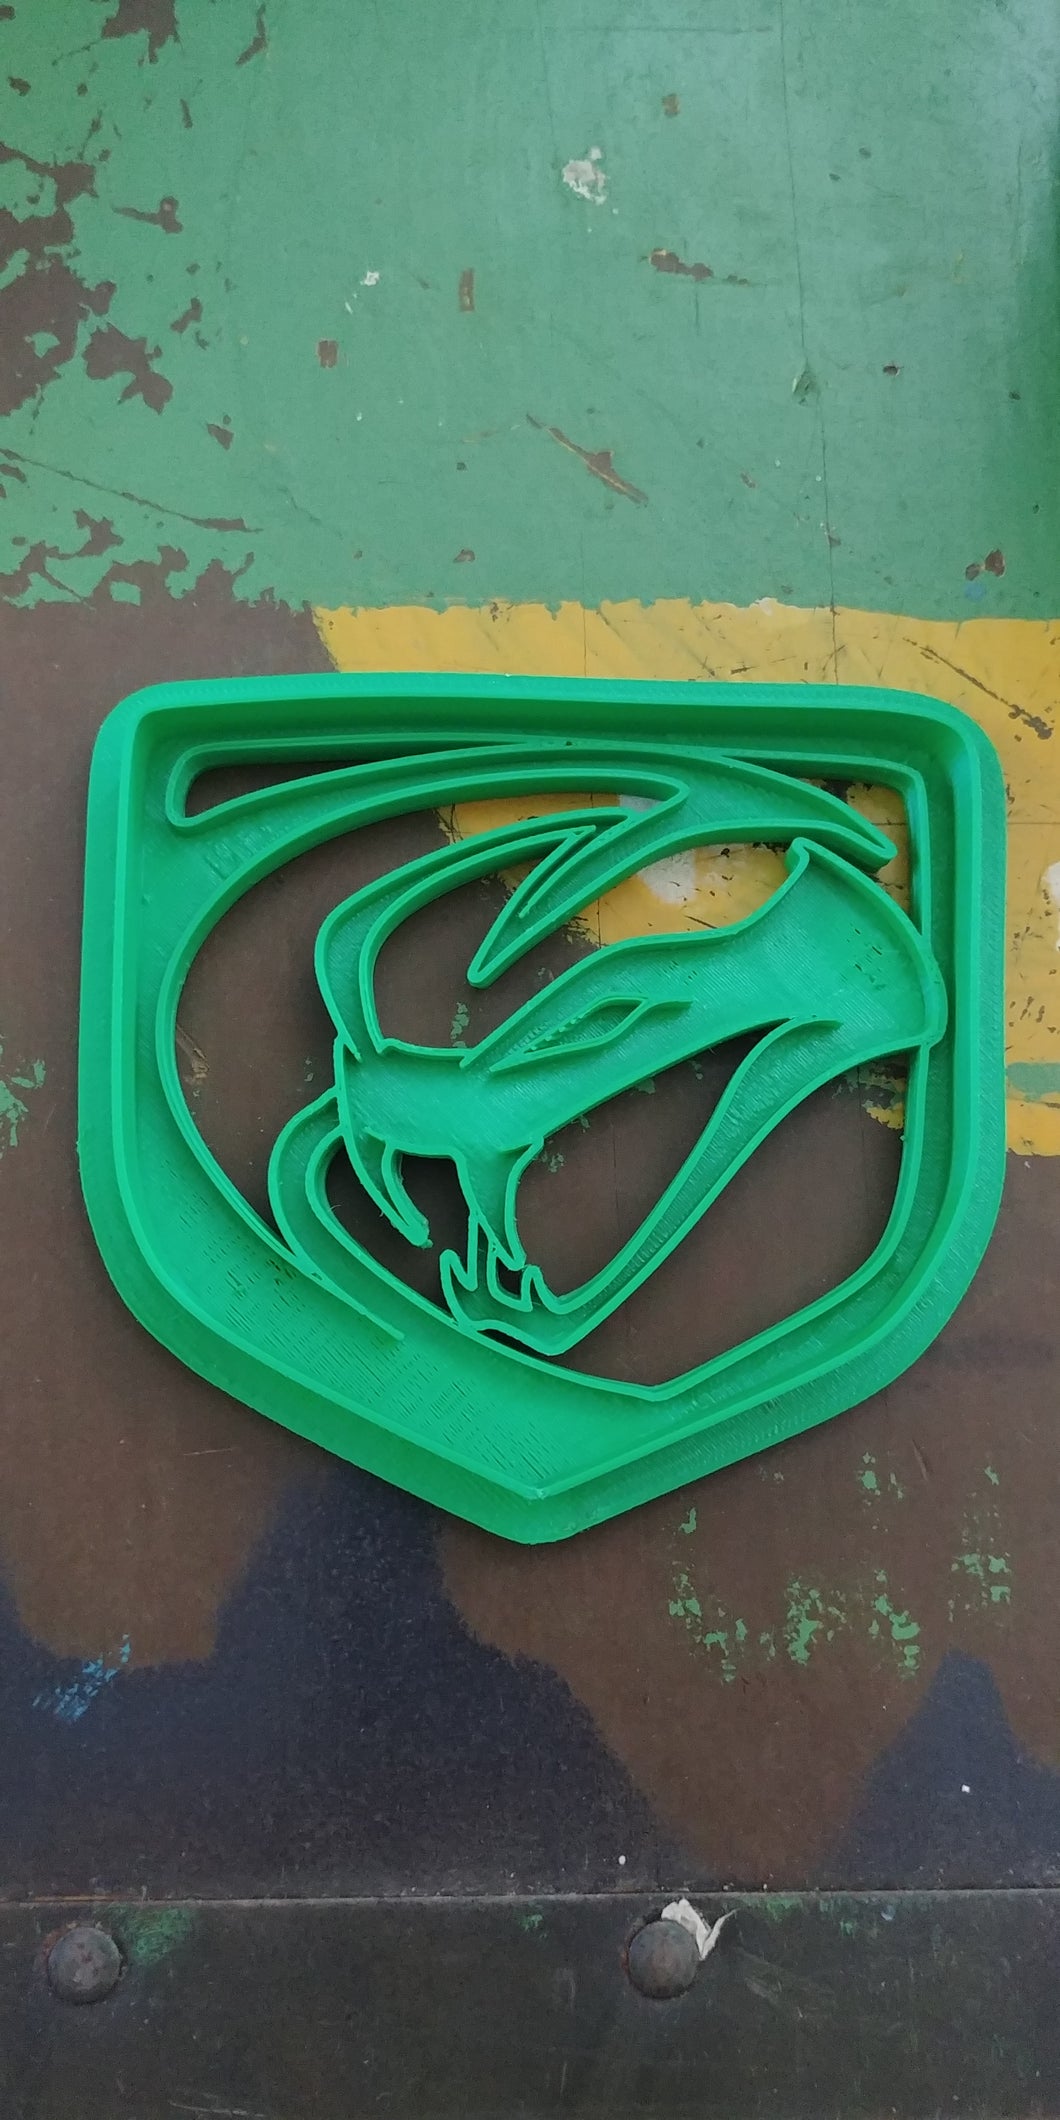 3D Printed Cookie Cutter Inspired by Dodge Viper Stryker Emblem